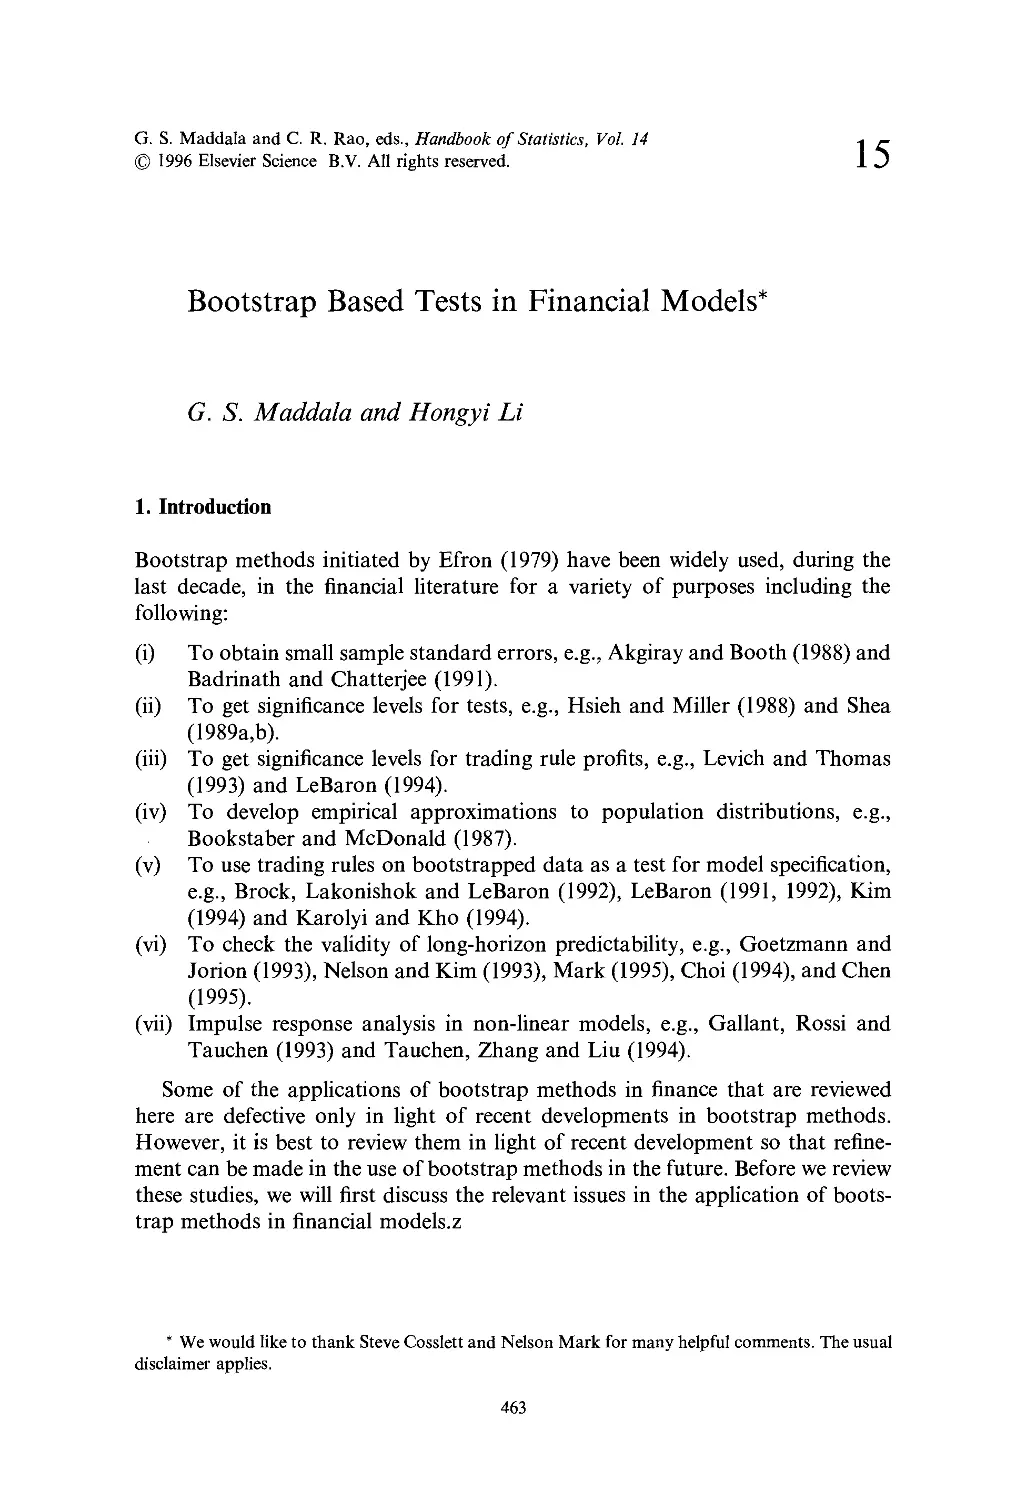 15. Bootstrap Based Tests in Financial Models